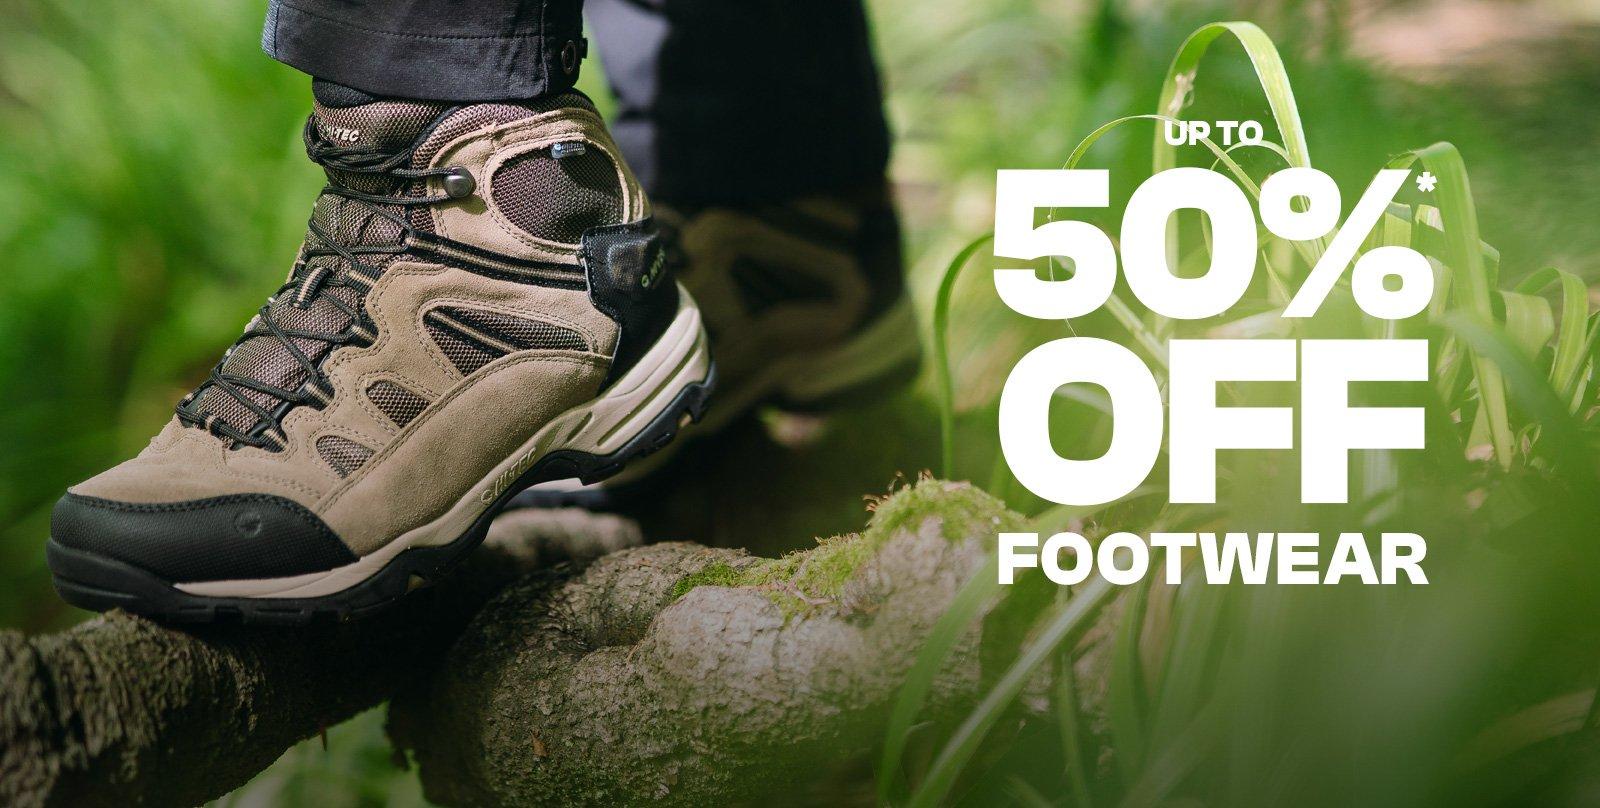 Up to 50% OFF Footwear